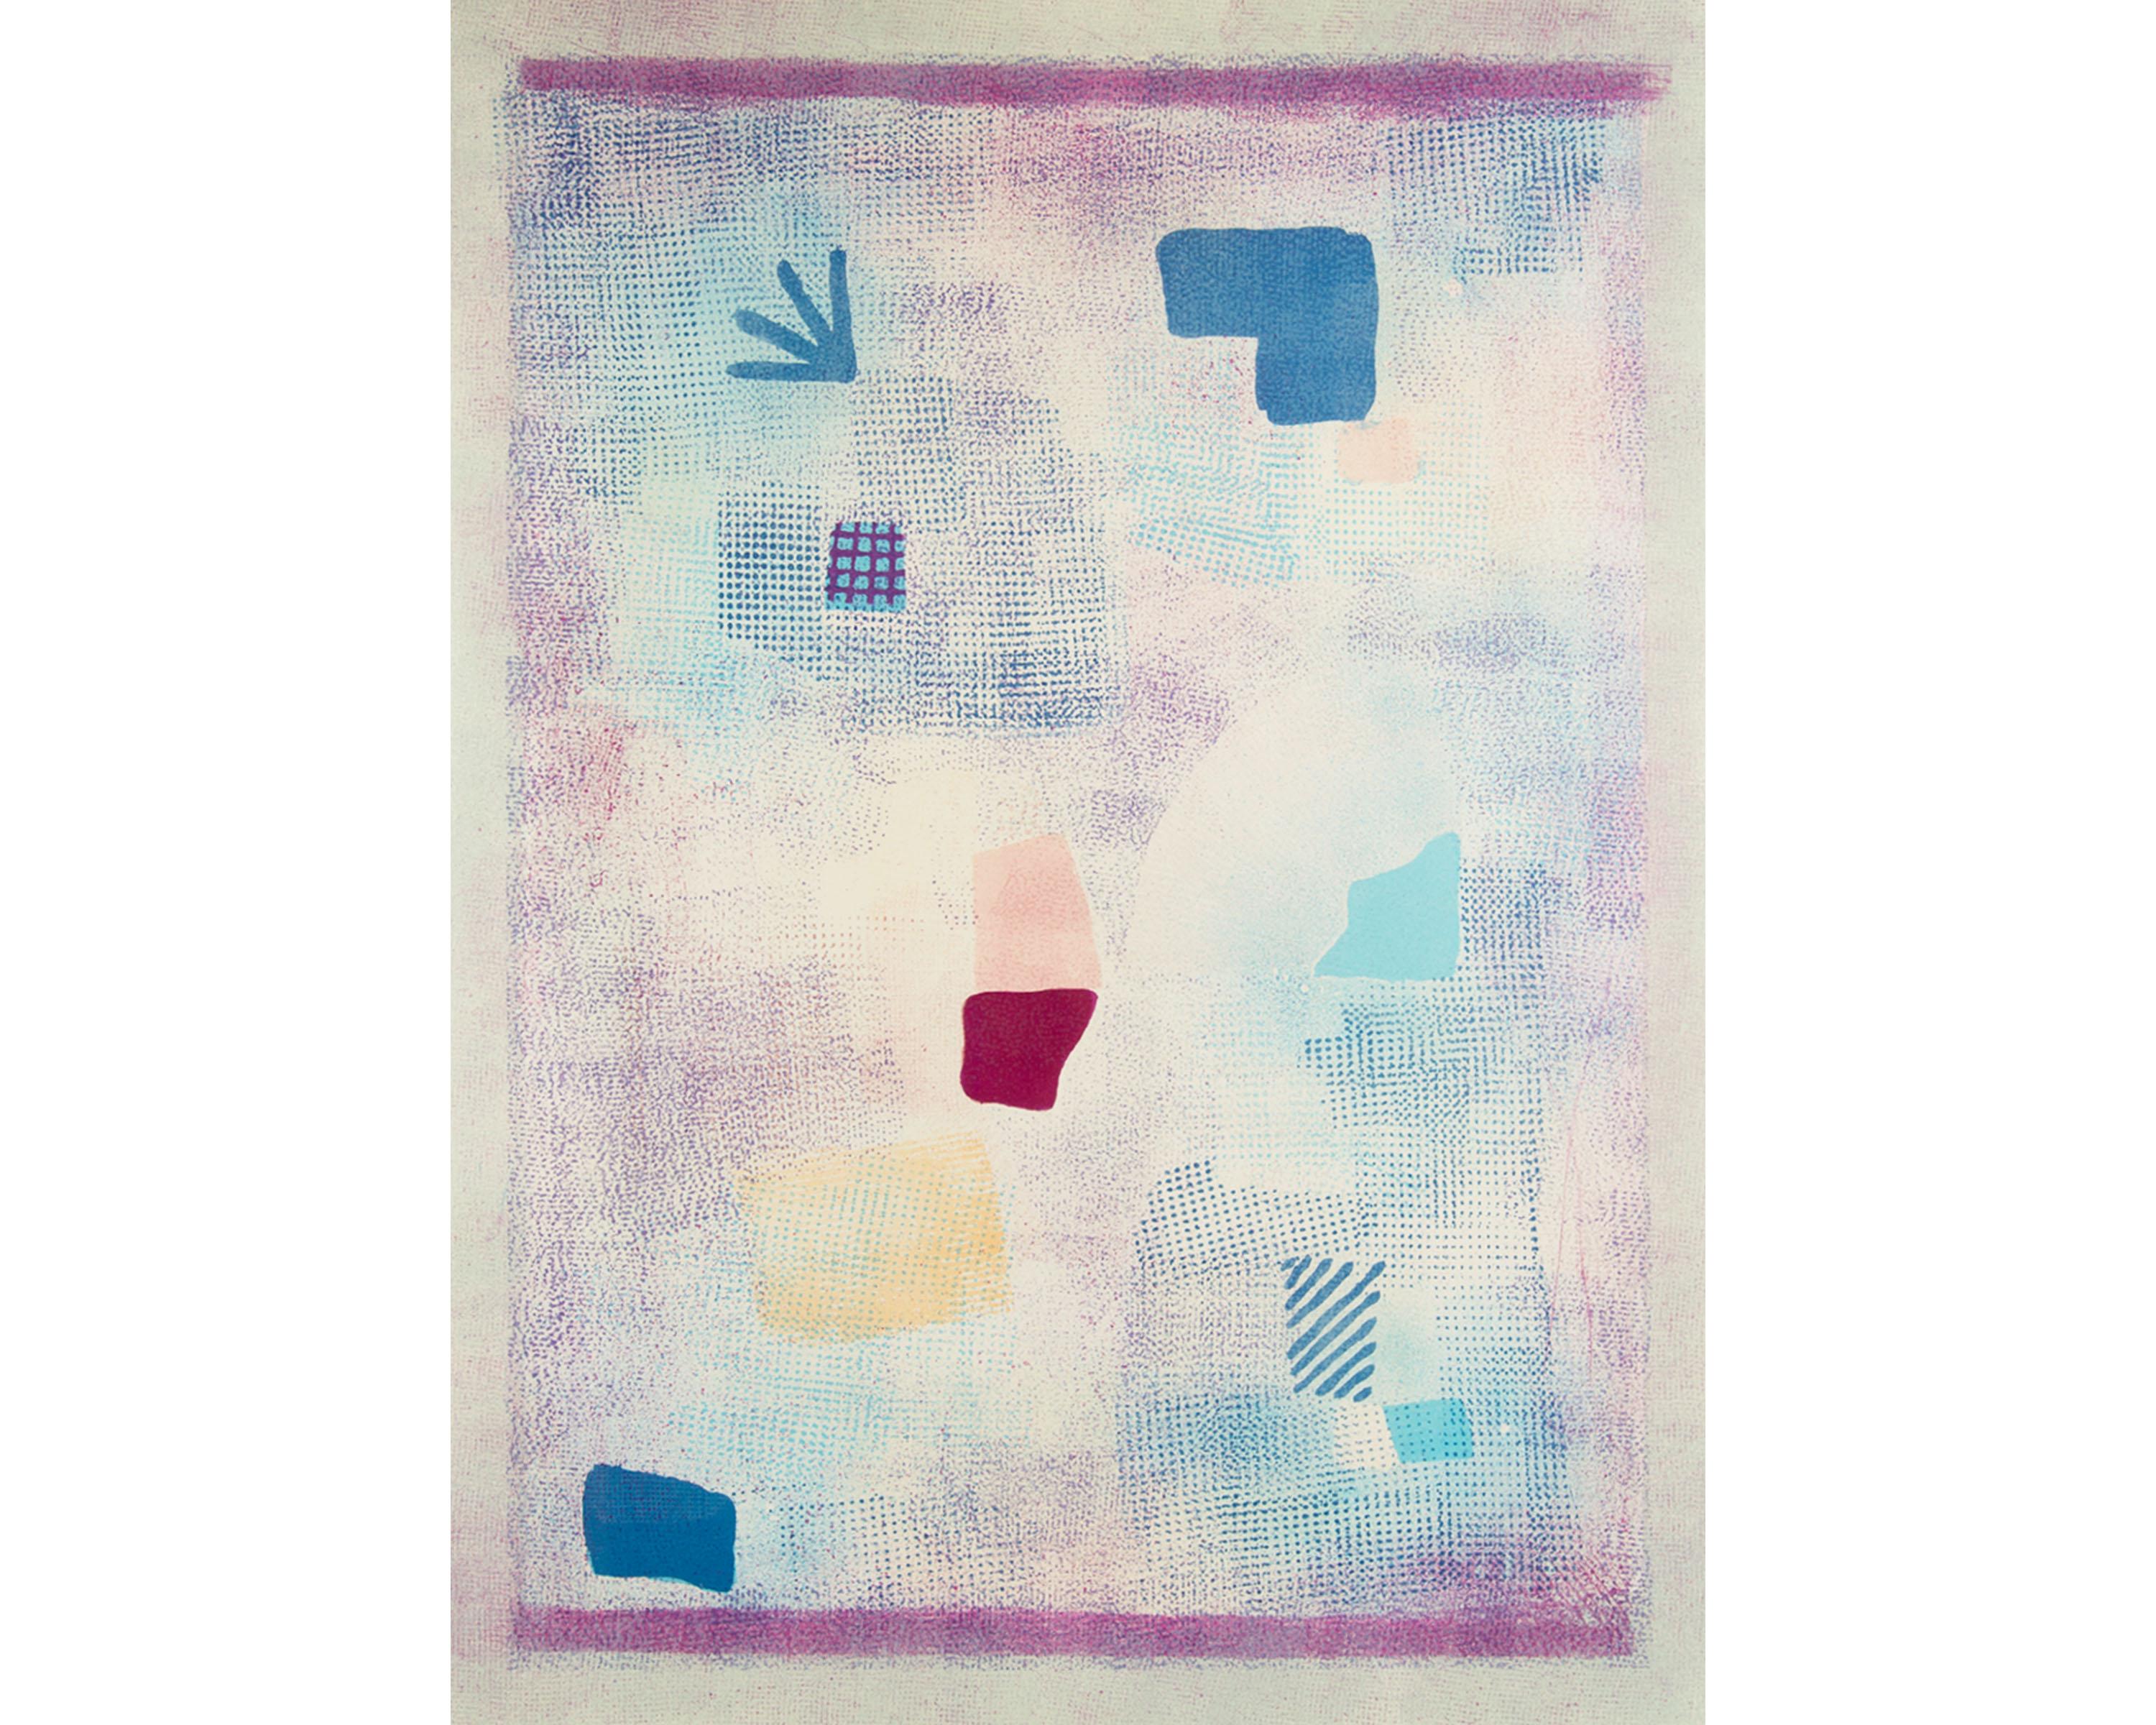 A limited edition abstract lithograph by American Abstract Expressionist Robert Natkin (1930-2010). Made in 1986, this sizable print features rich textures which are reminiscent of textile weaves and splattered paint. Pink, blue and purple inks draw